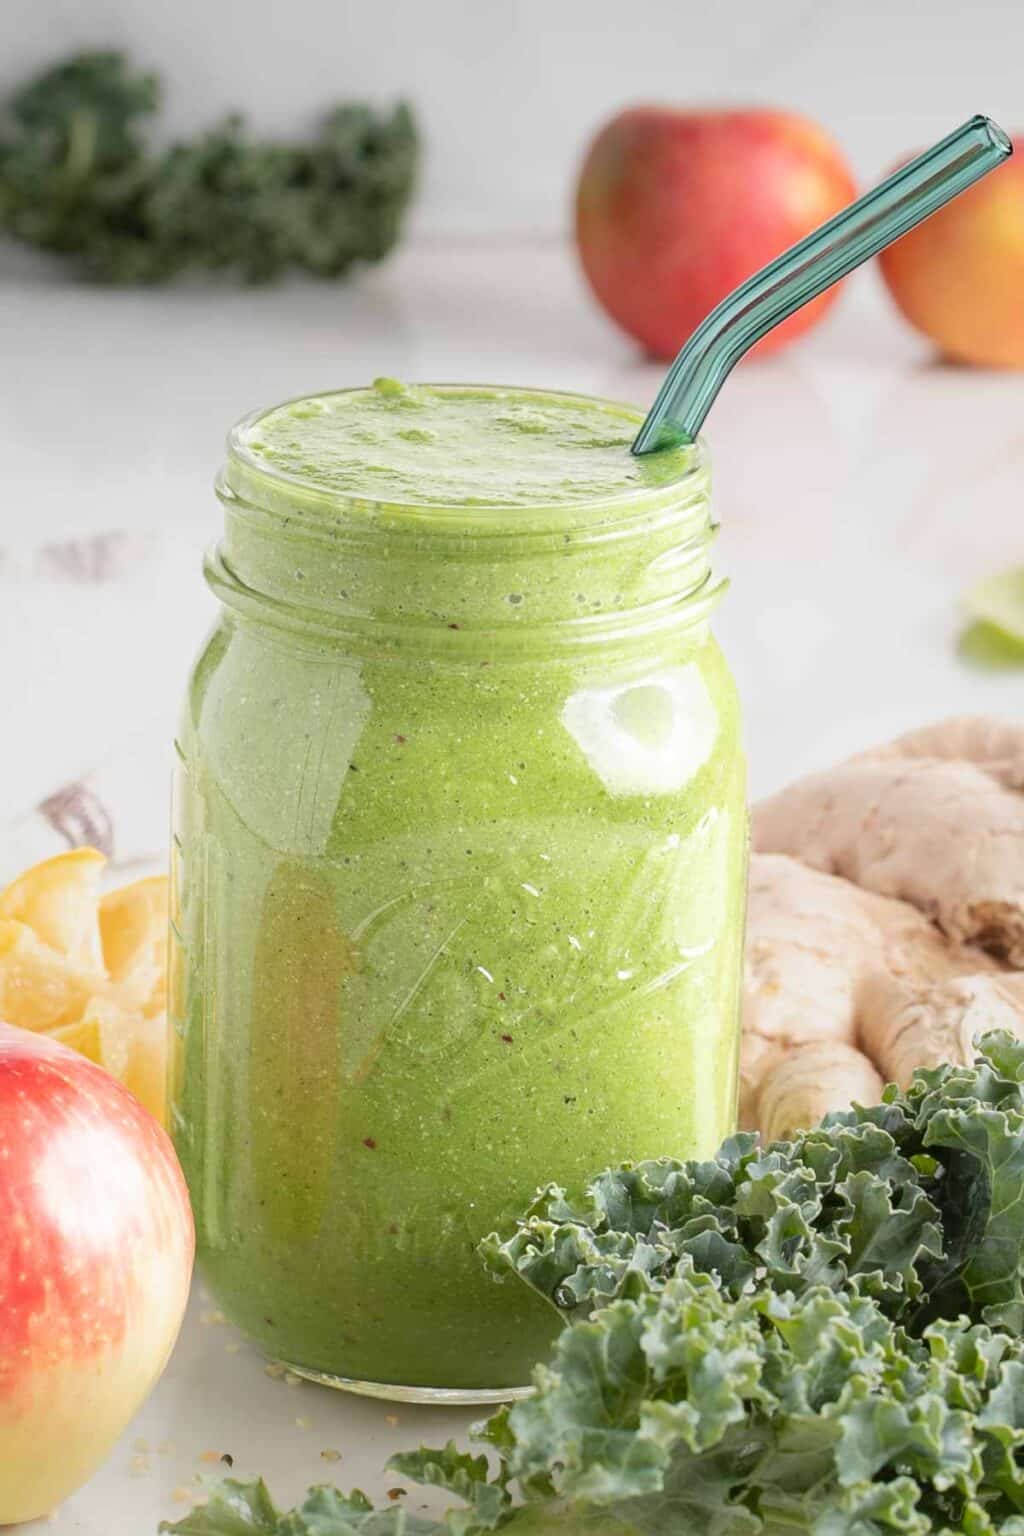 Mason jar with bright green smoothie surrounded by apple, kale, lemon and ginger.